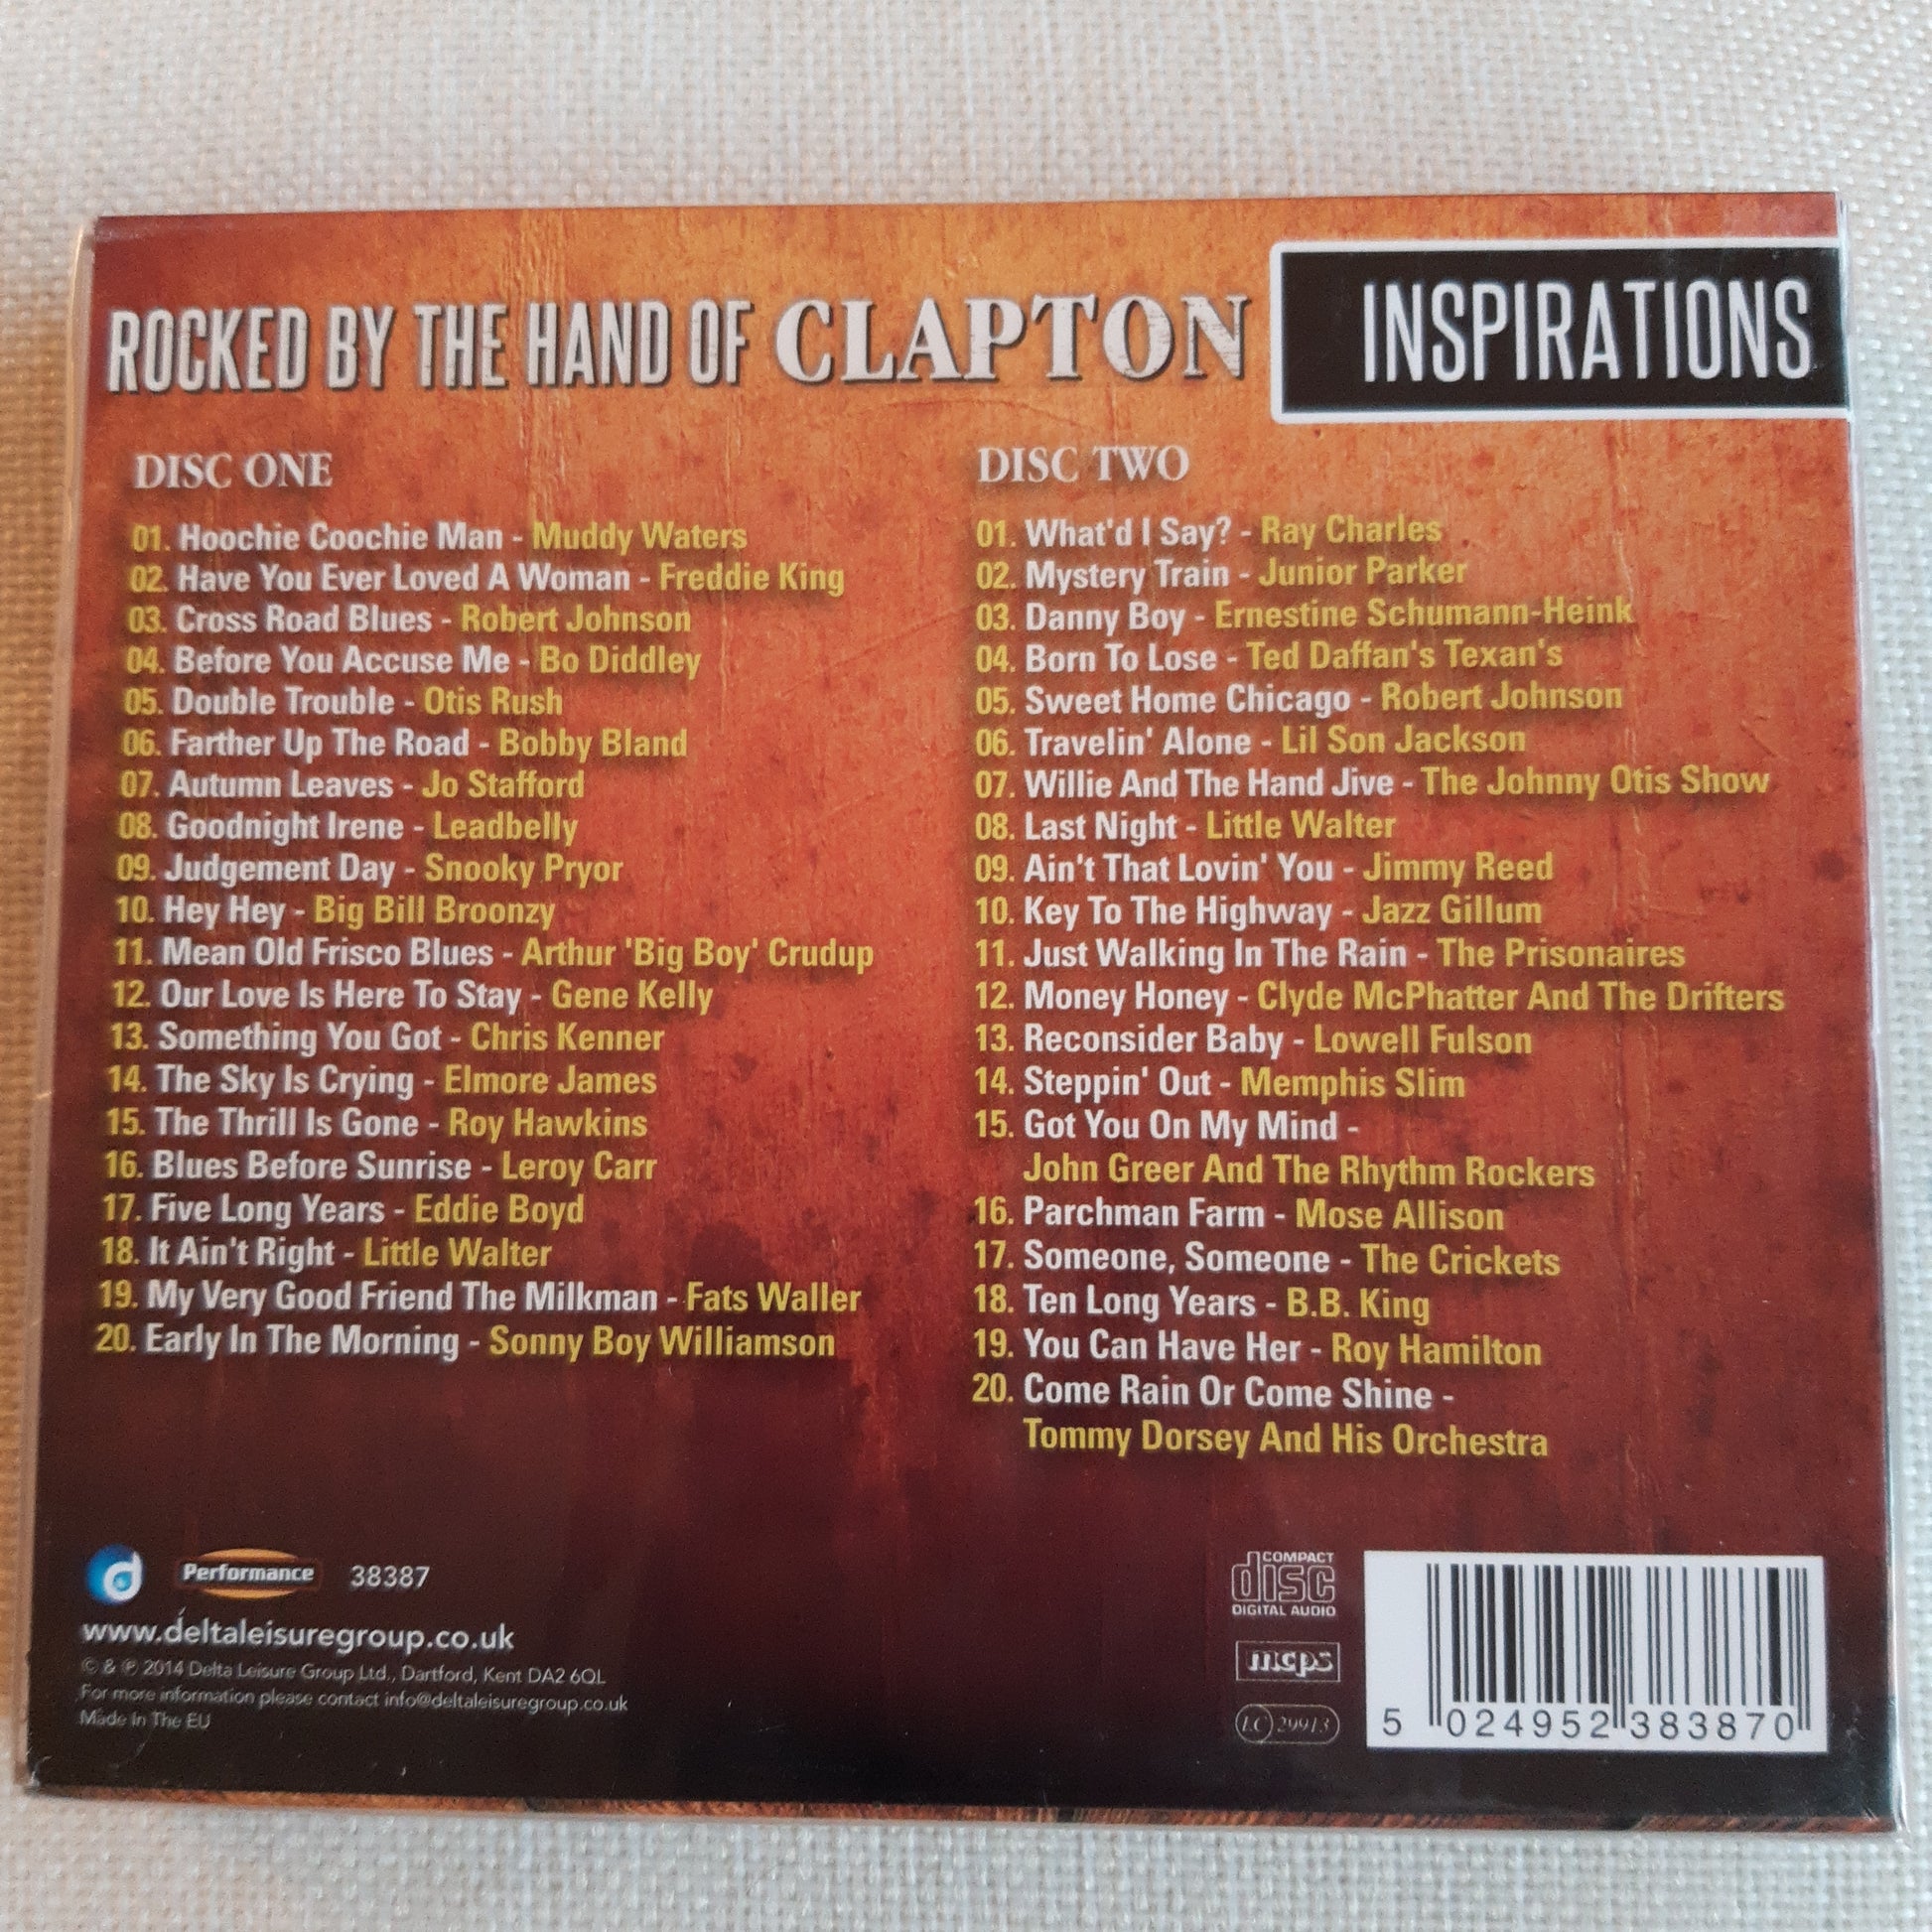 rocked by the hand of clapton - 2cd